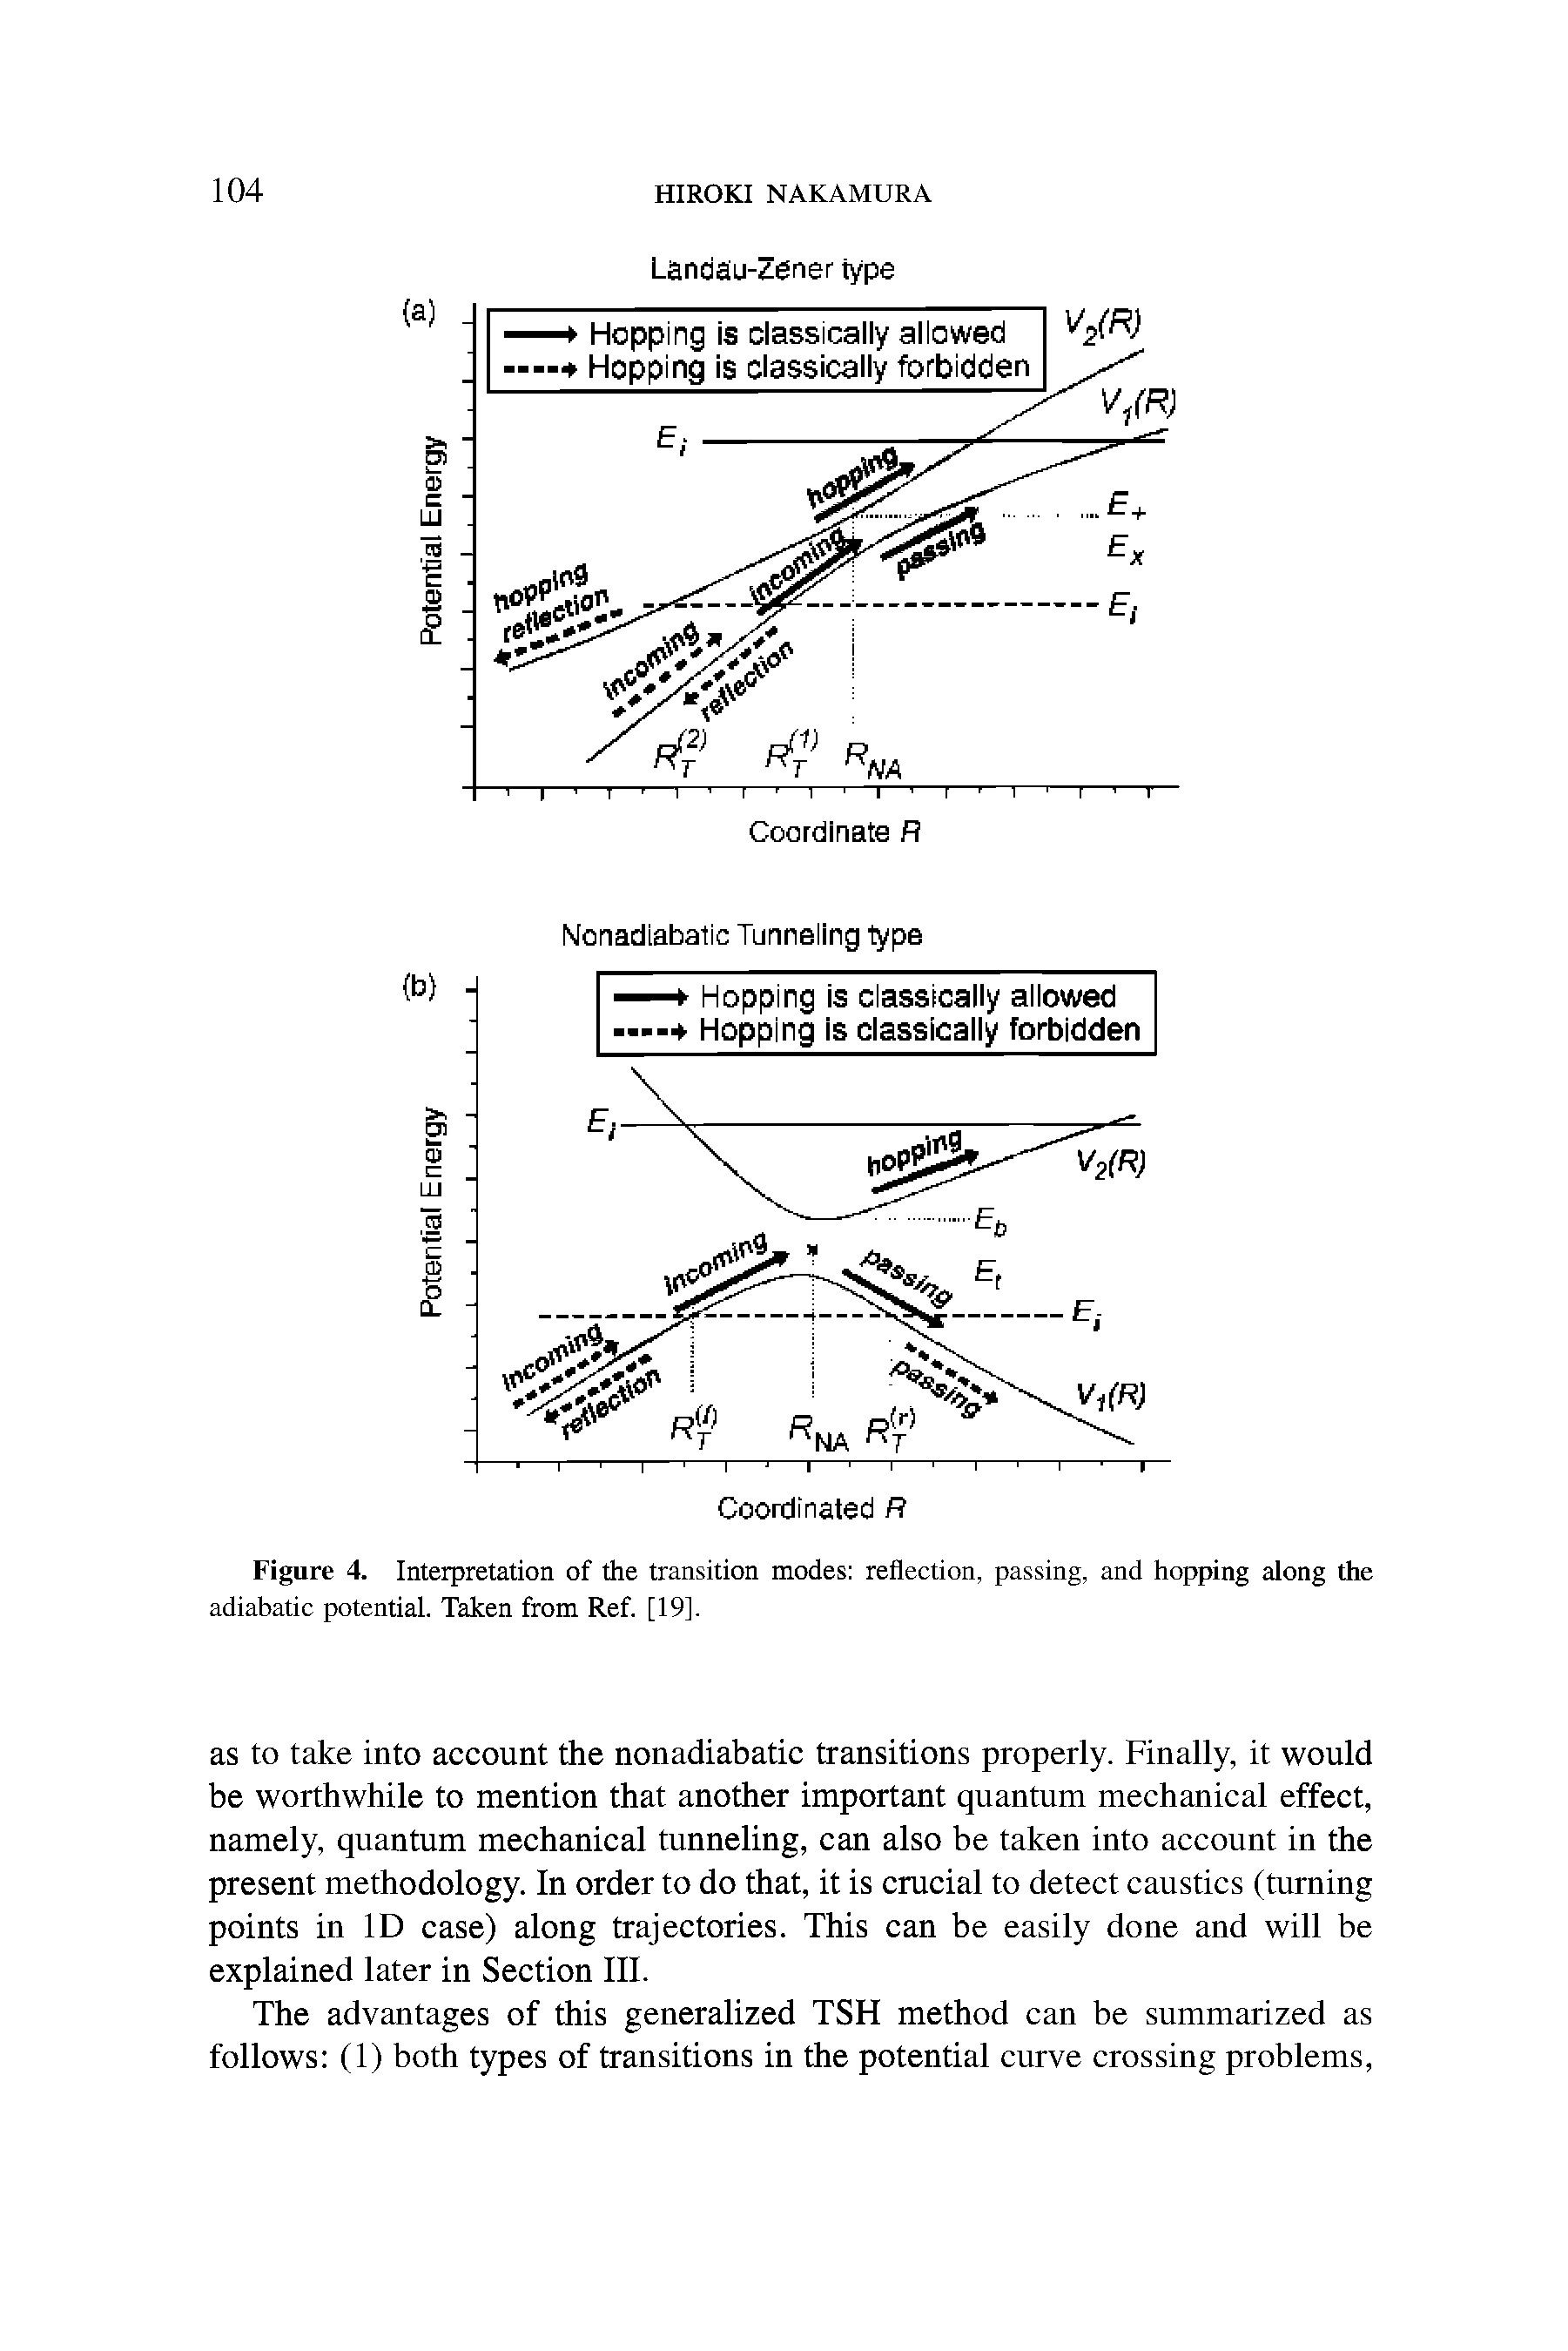 Figure 4. Interpretation of the transition modes reflection, passing, and hopping along the adiabatic potential. Taken from Ref. [19].